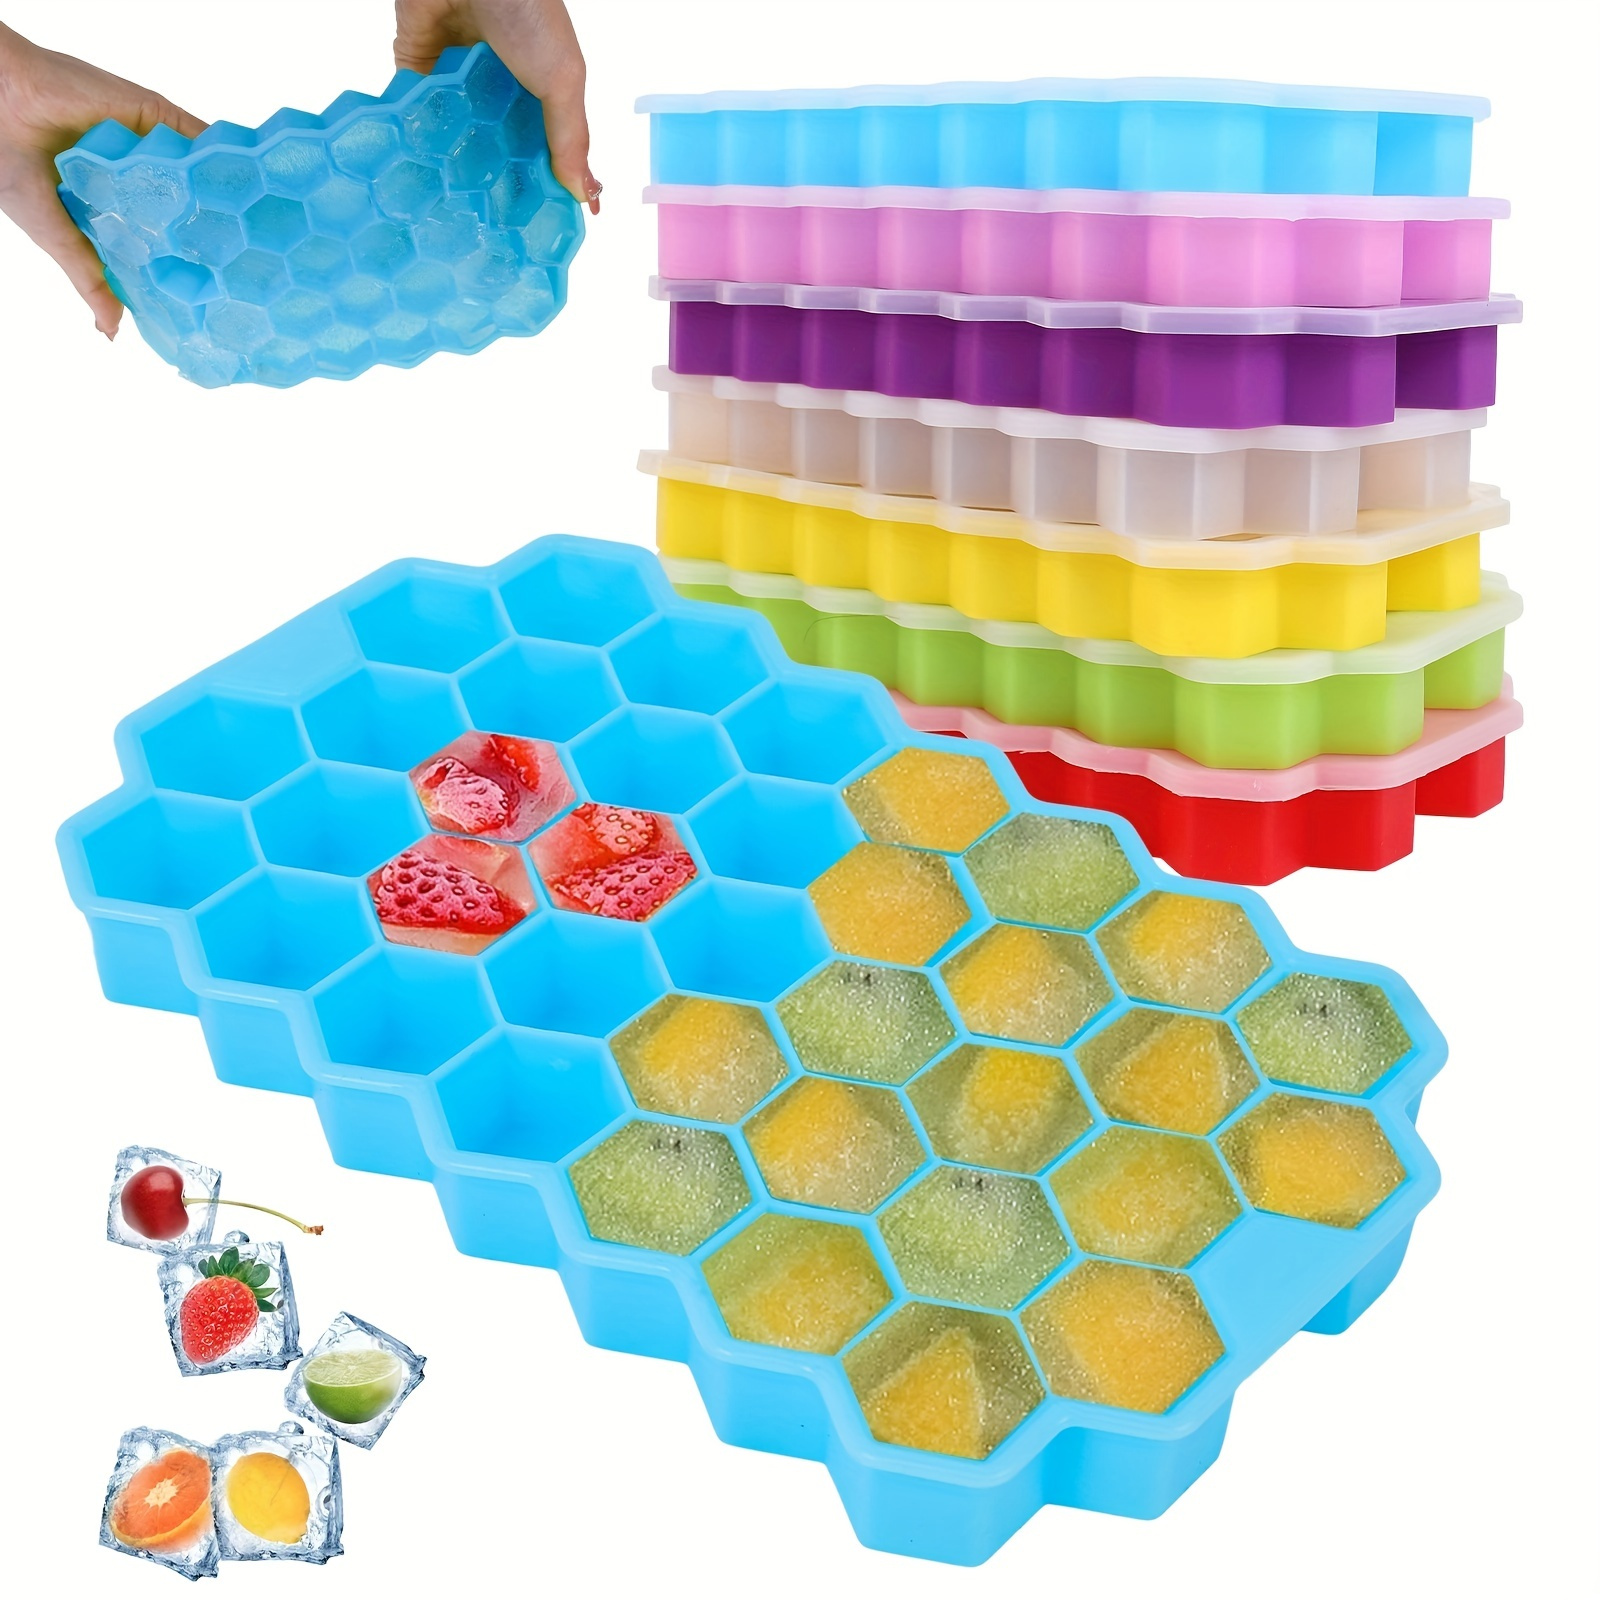 7 Shape Diy Dice Ice Tray Mold Game Dice Mini Ice Cube Trays With